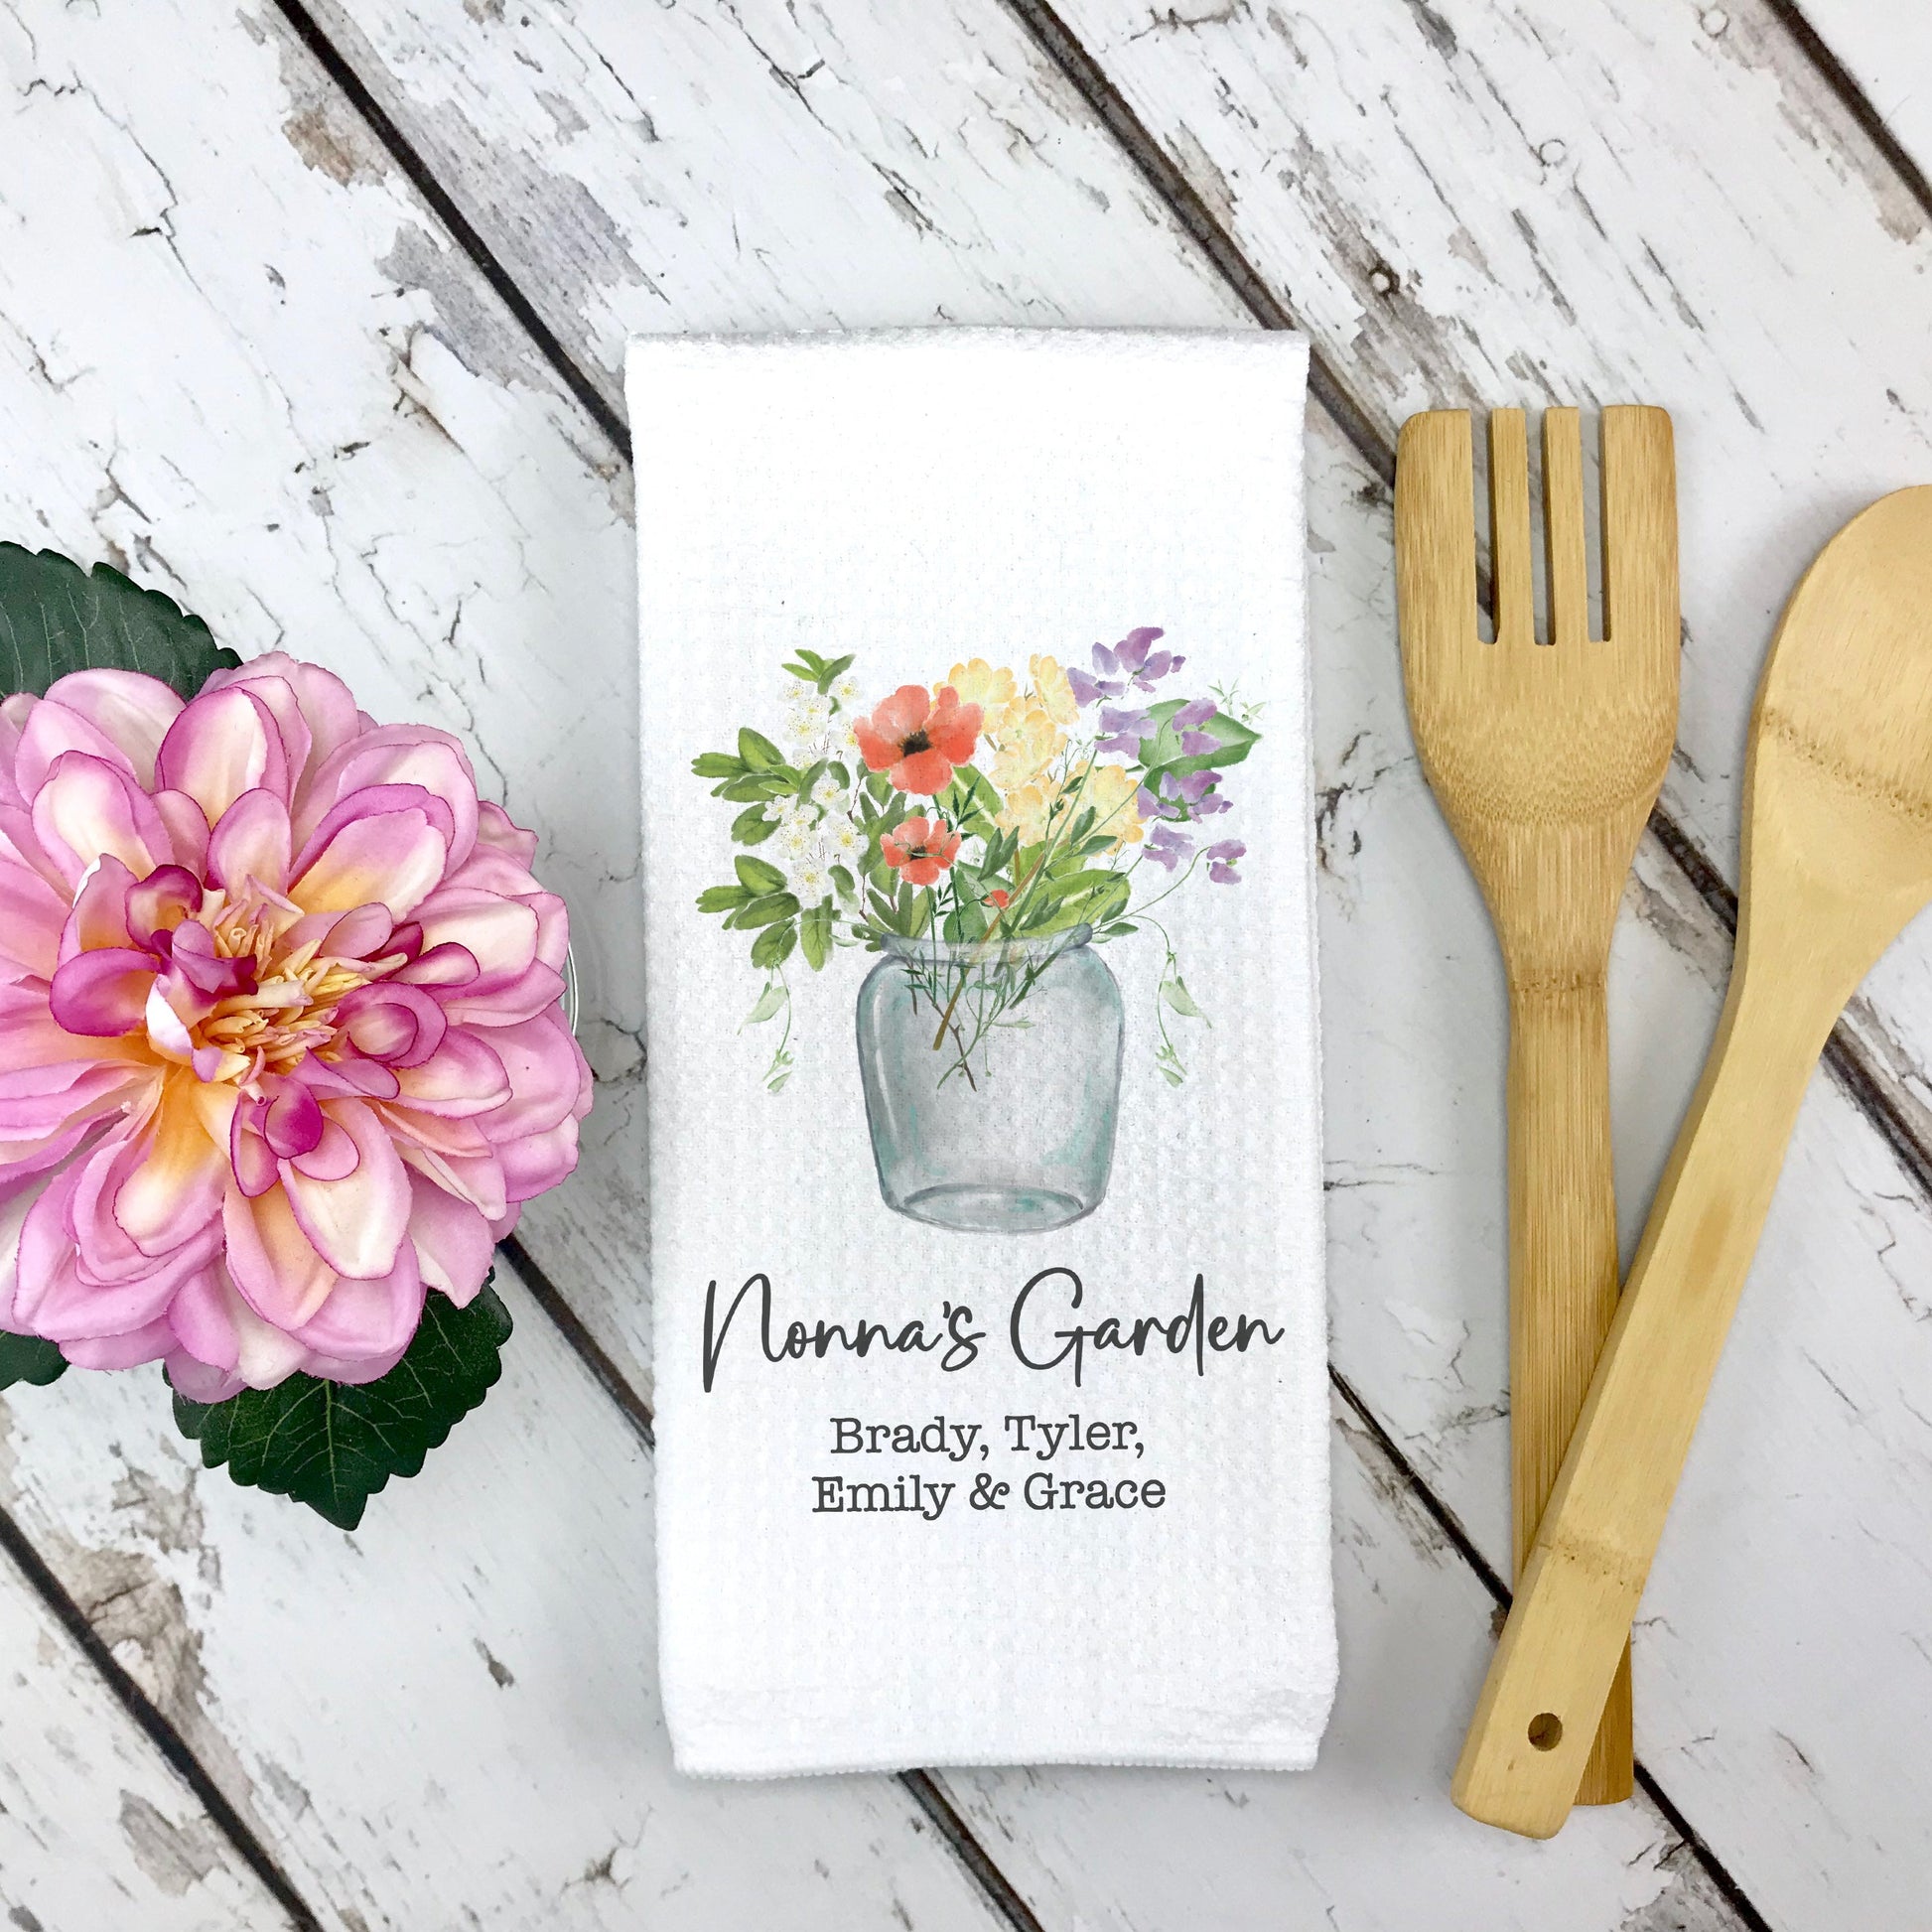 Beautifully made custom gift for Mother's Day: Birth month flower vase towel for Mom's kitchen. Customize with kids' names and your own message. 